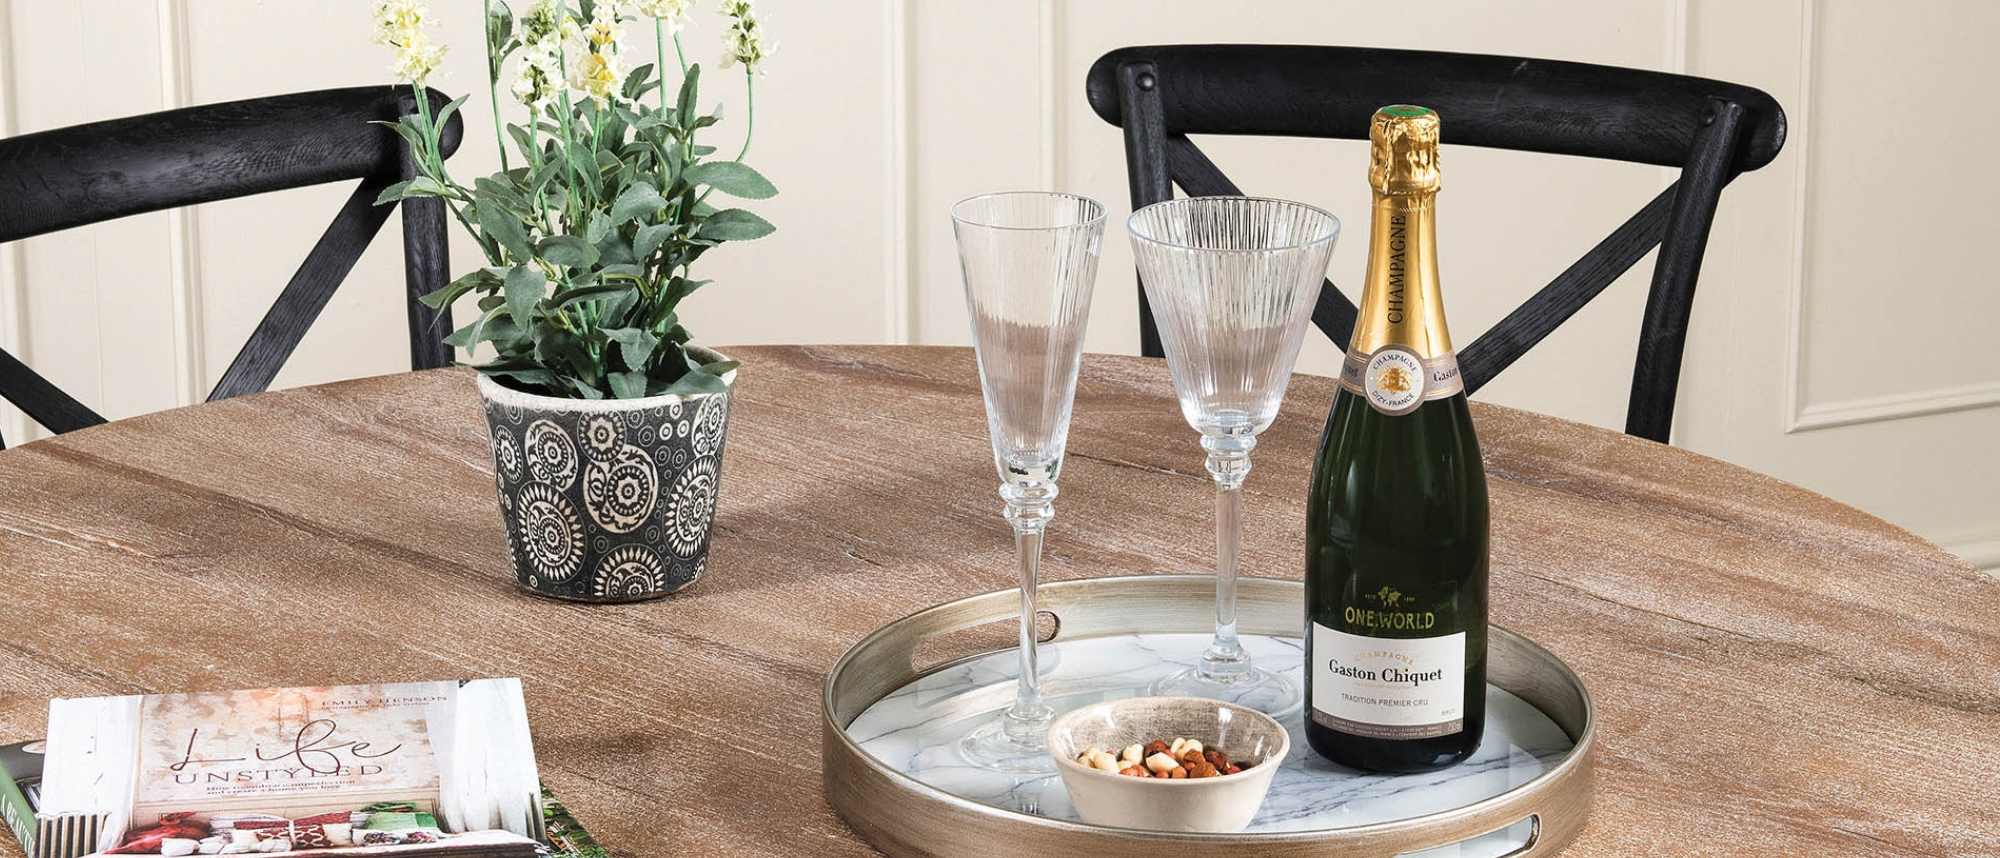 Champagne and glasses on a round tray